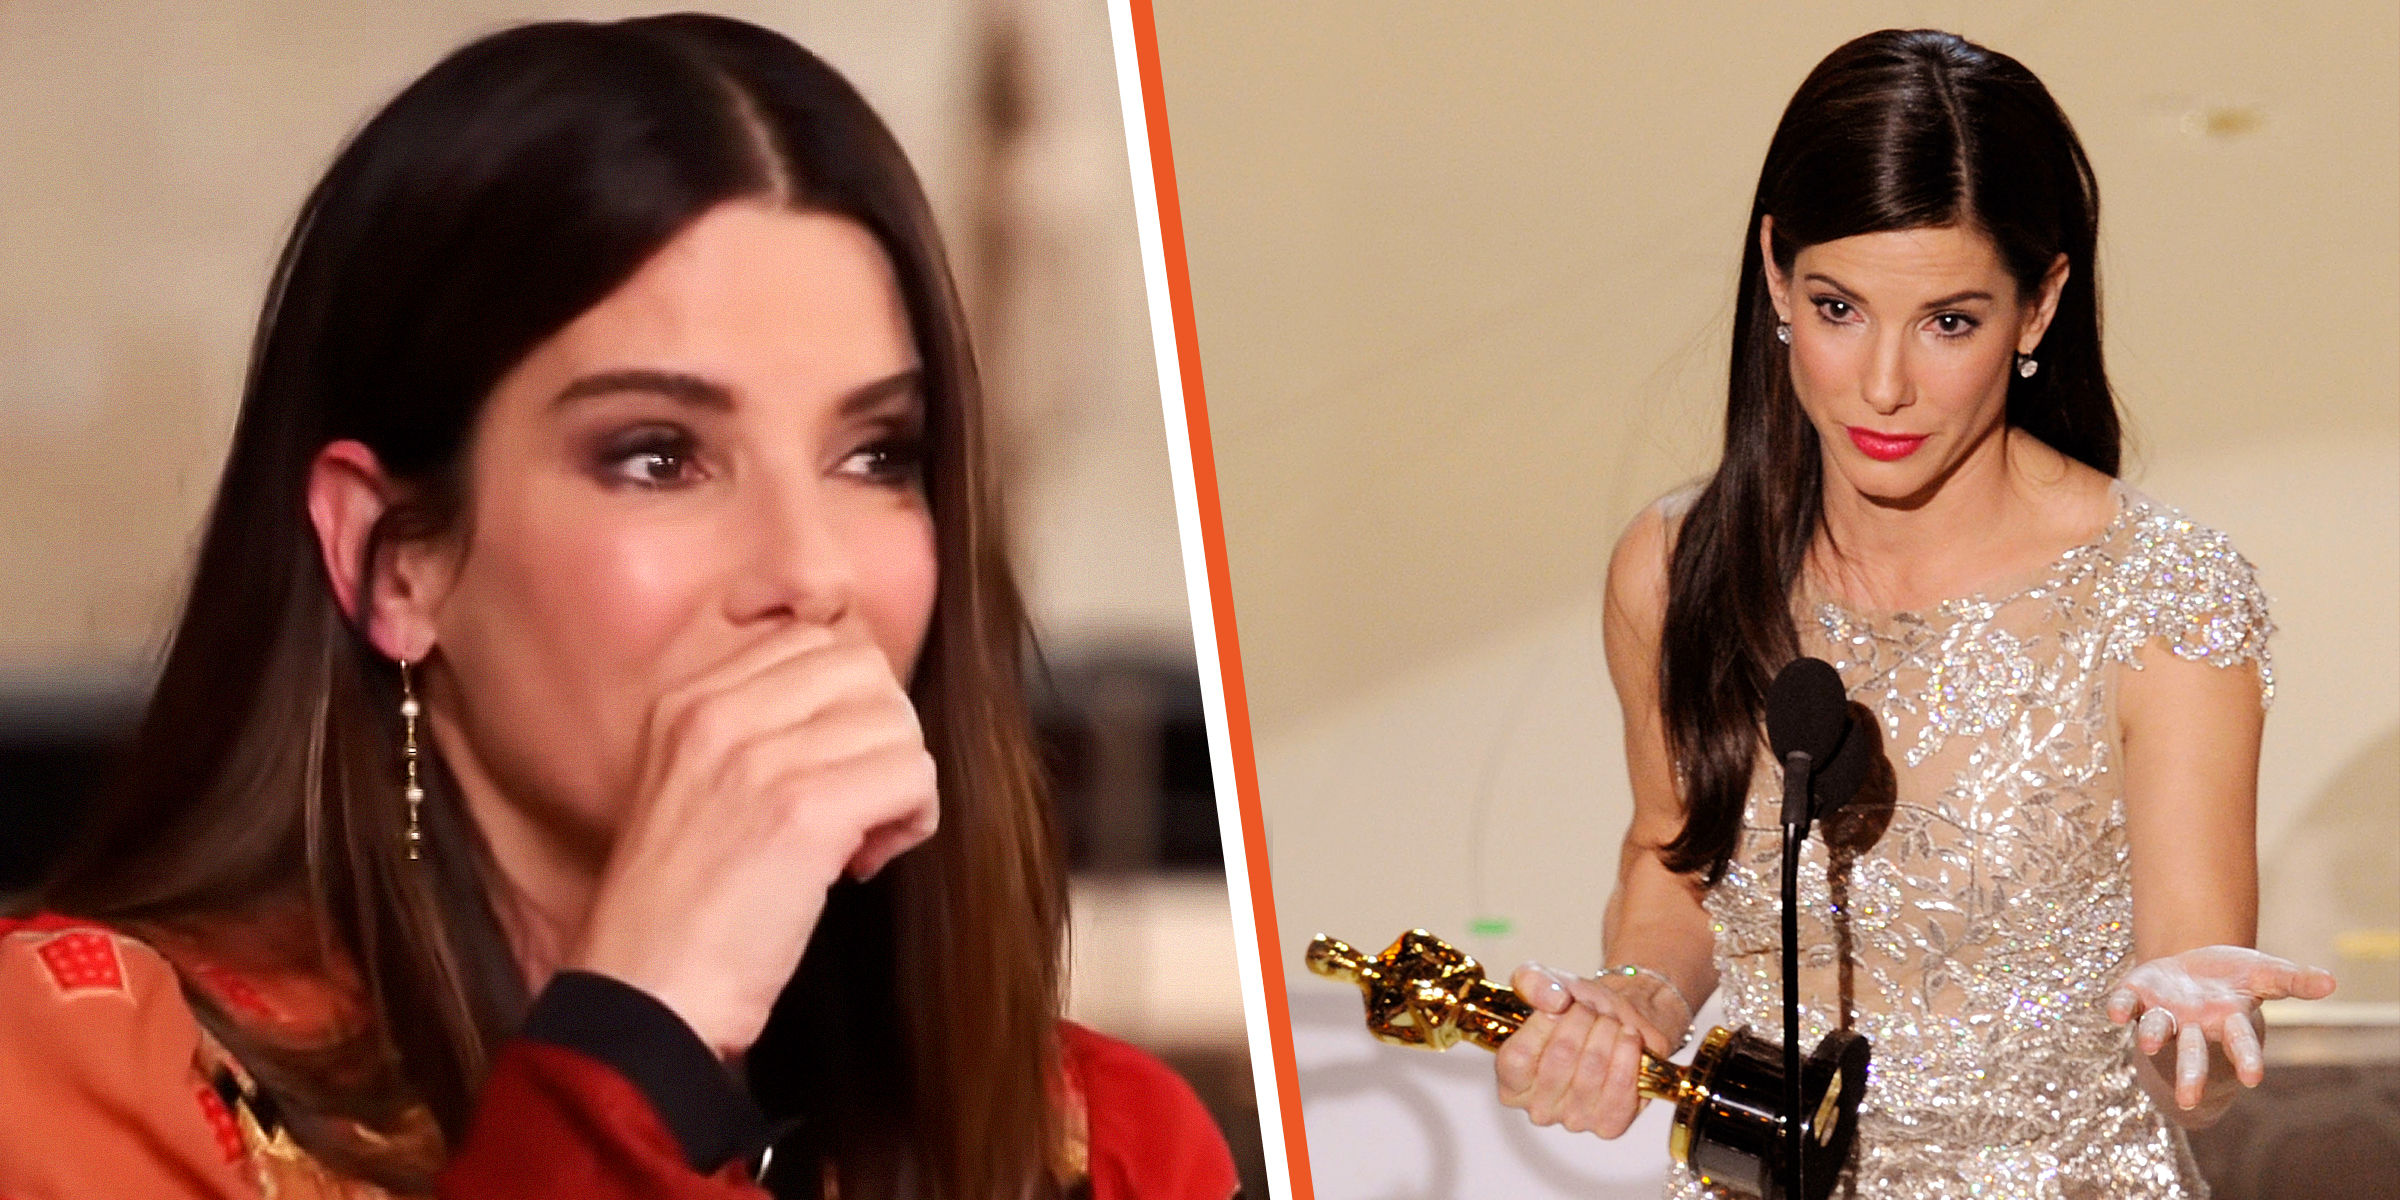 Sandra Bullock | Source: Youtube/@TODAY | Getty Images